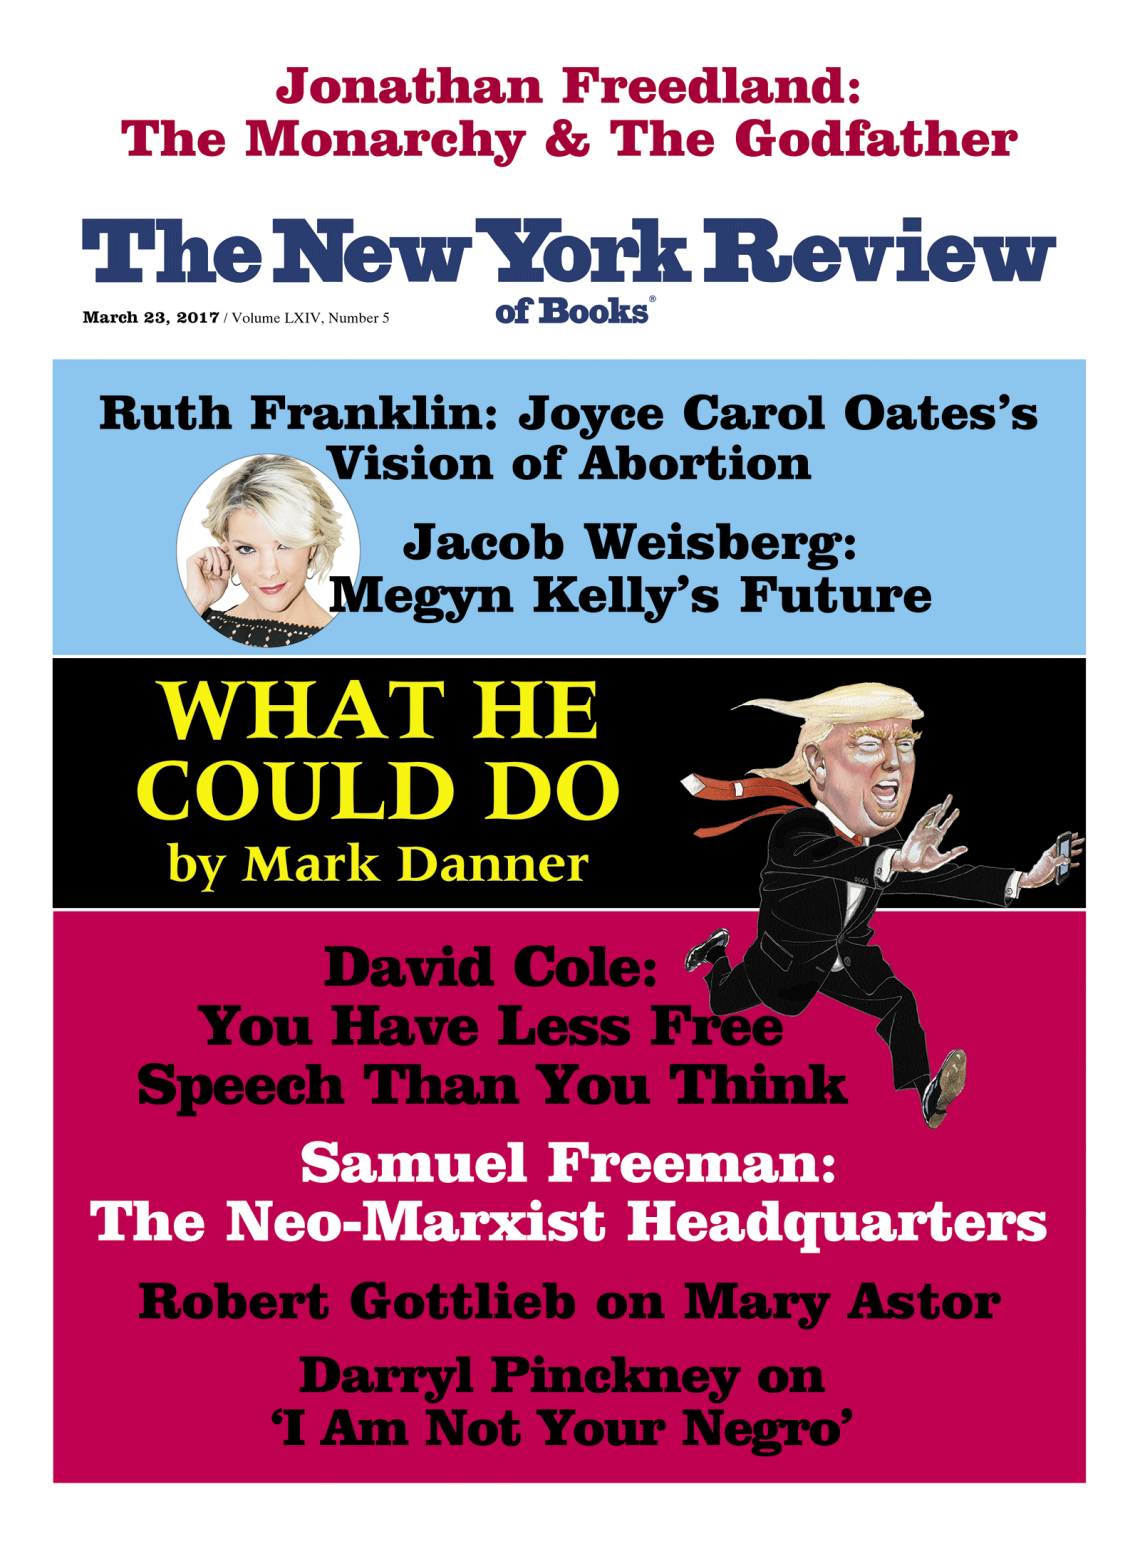 Image of the March 23, 2017 issue cover.